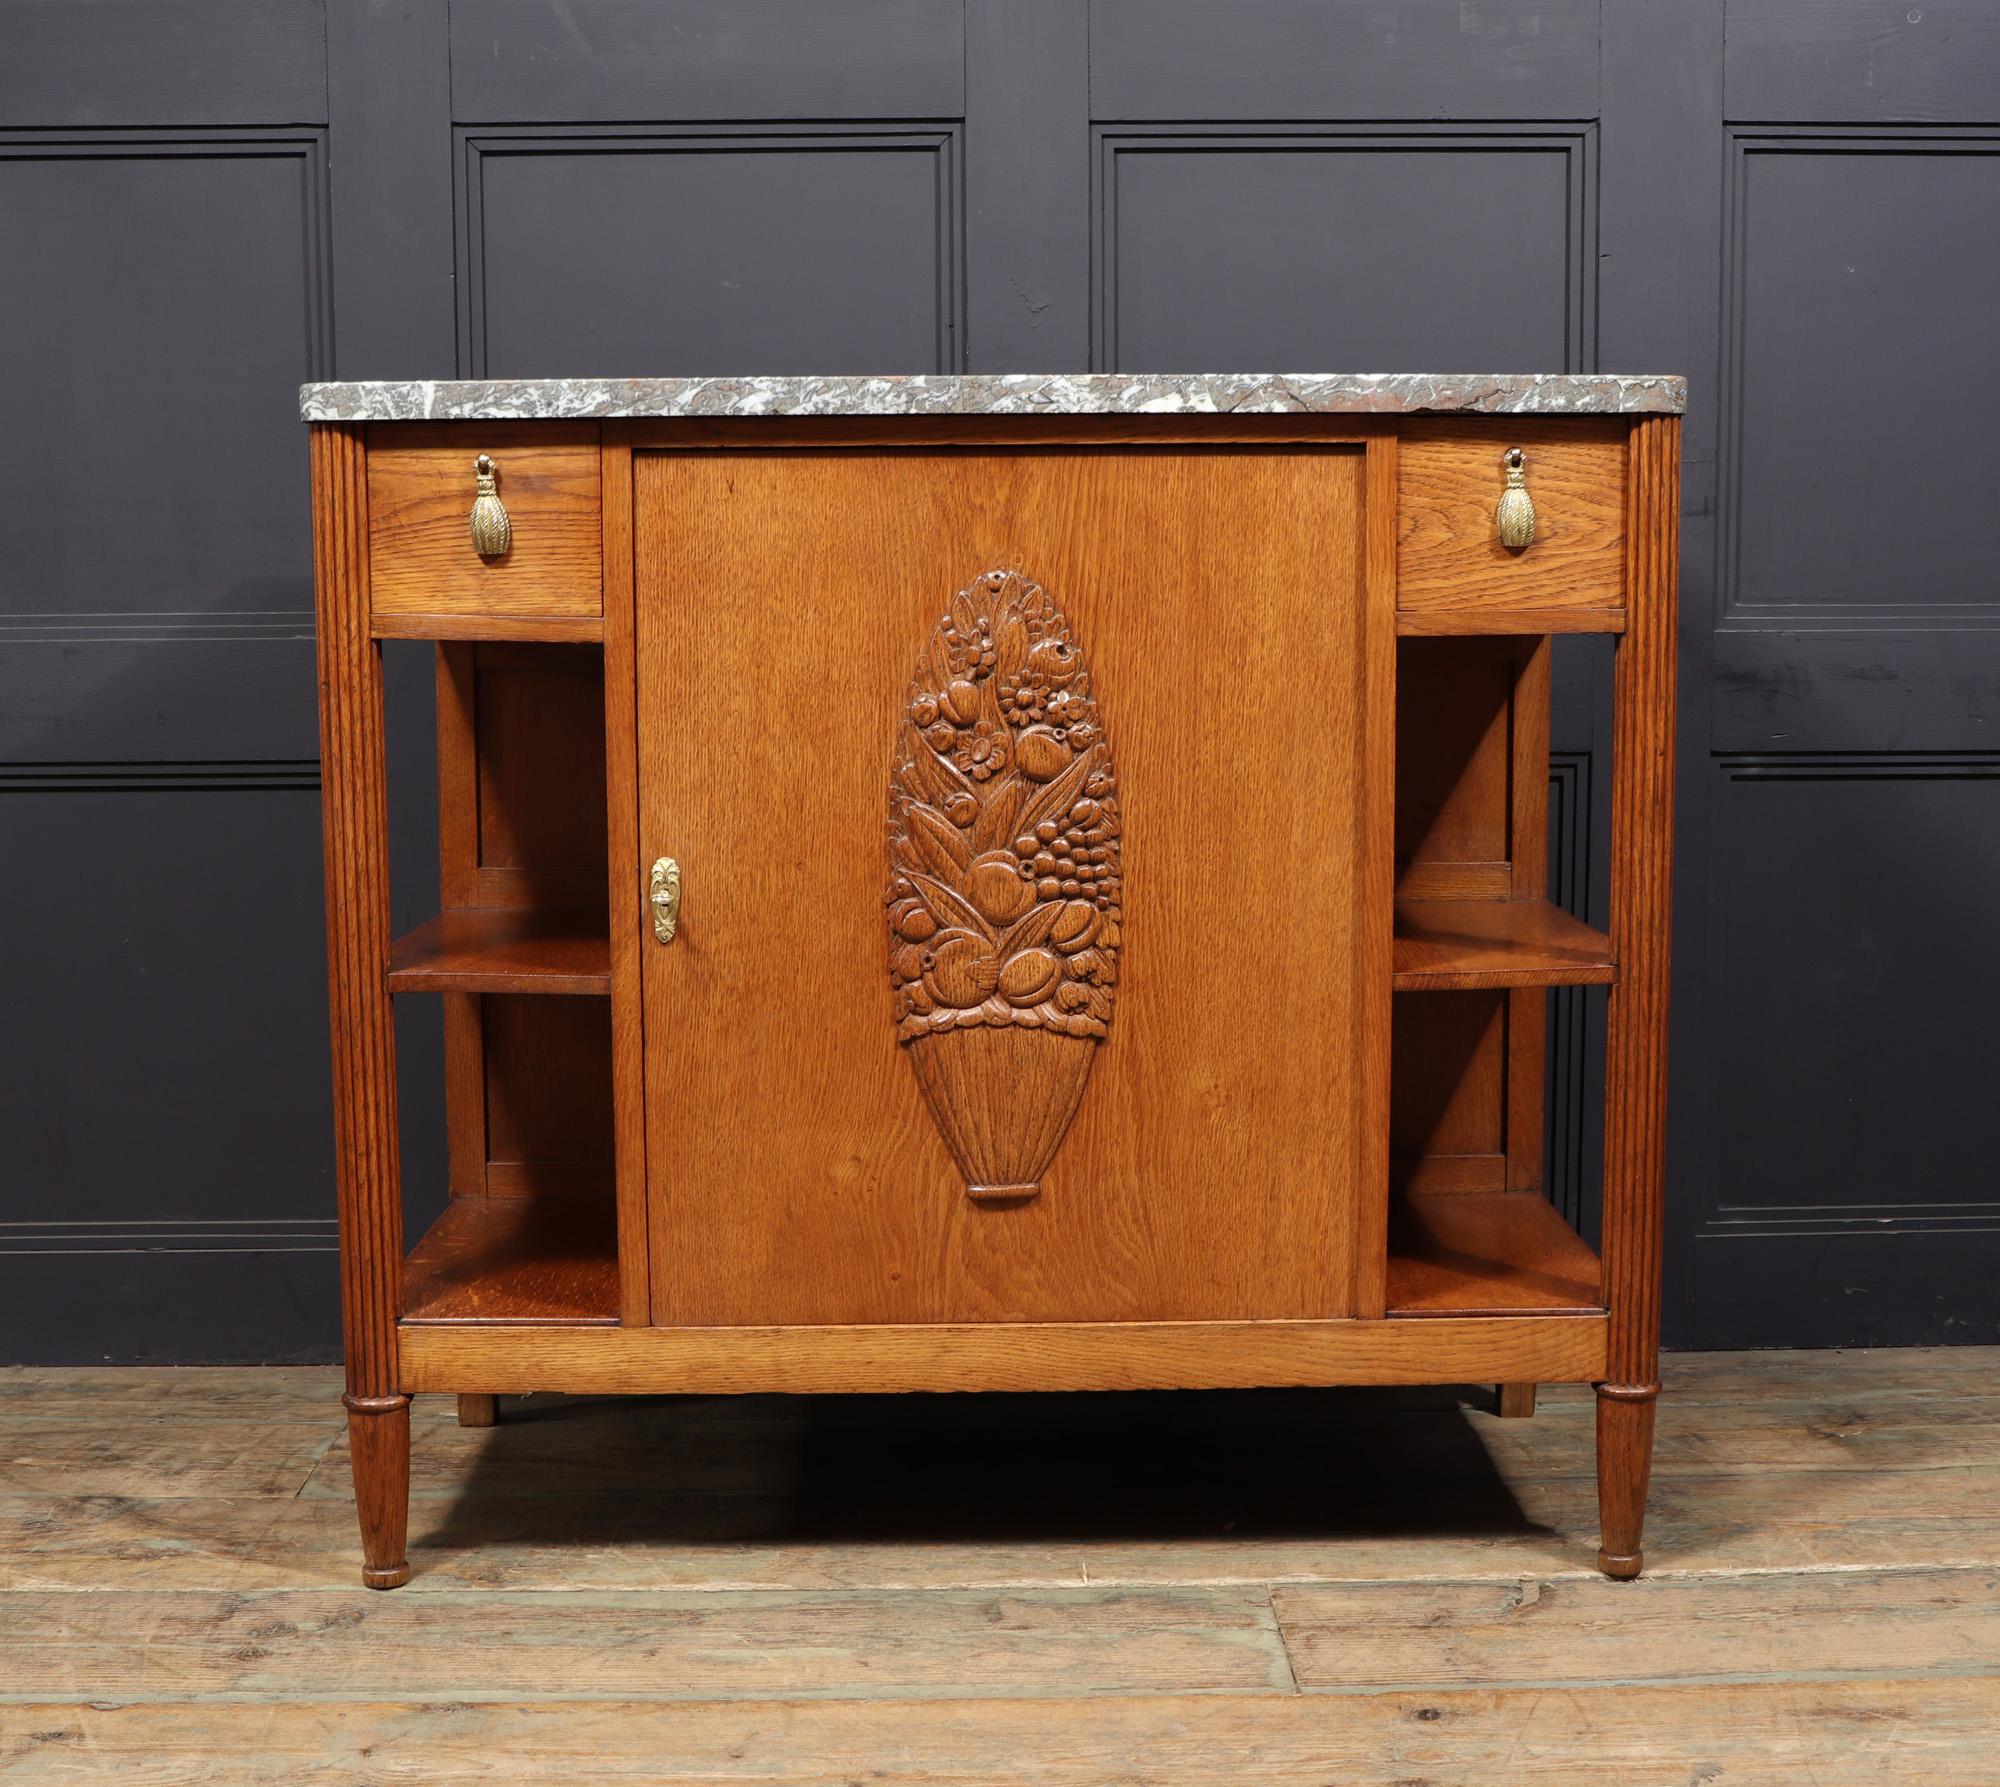 FRENCH ART DECO HALL CABINET
A stunning French Art Deco cabinet crafted from solid oak in the 1930s, inspired by the renowned Paul Follot. This exquisite piece features a central lockable cupboard door adorned with intricate floral carvings in a